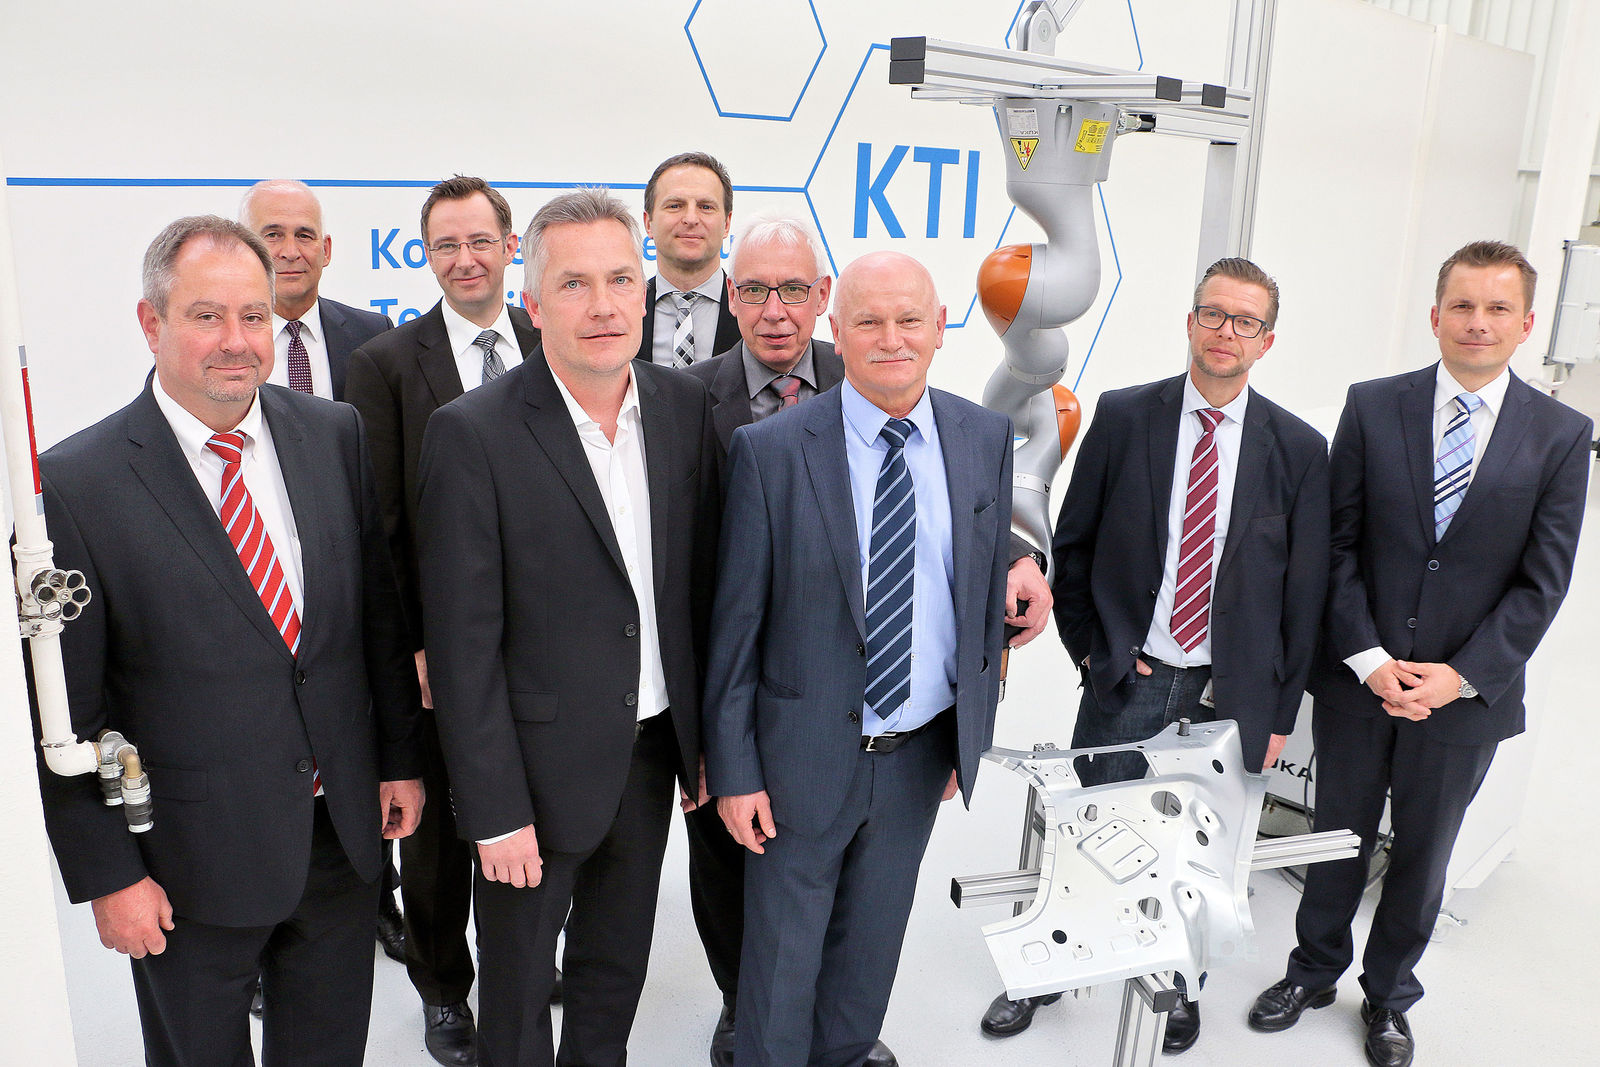 Volkswagen plant in Wolfsburg opens competence center for technology and innovation